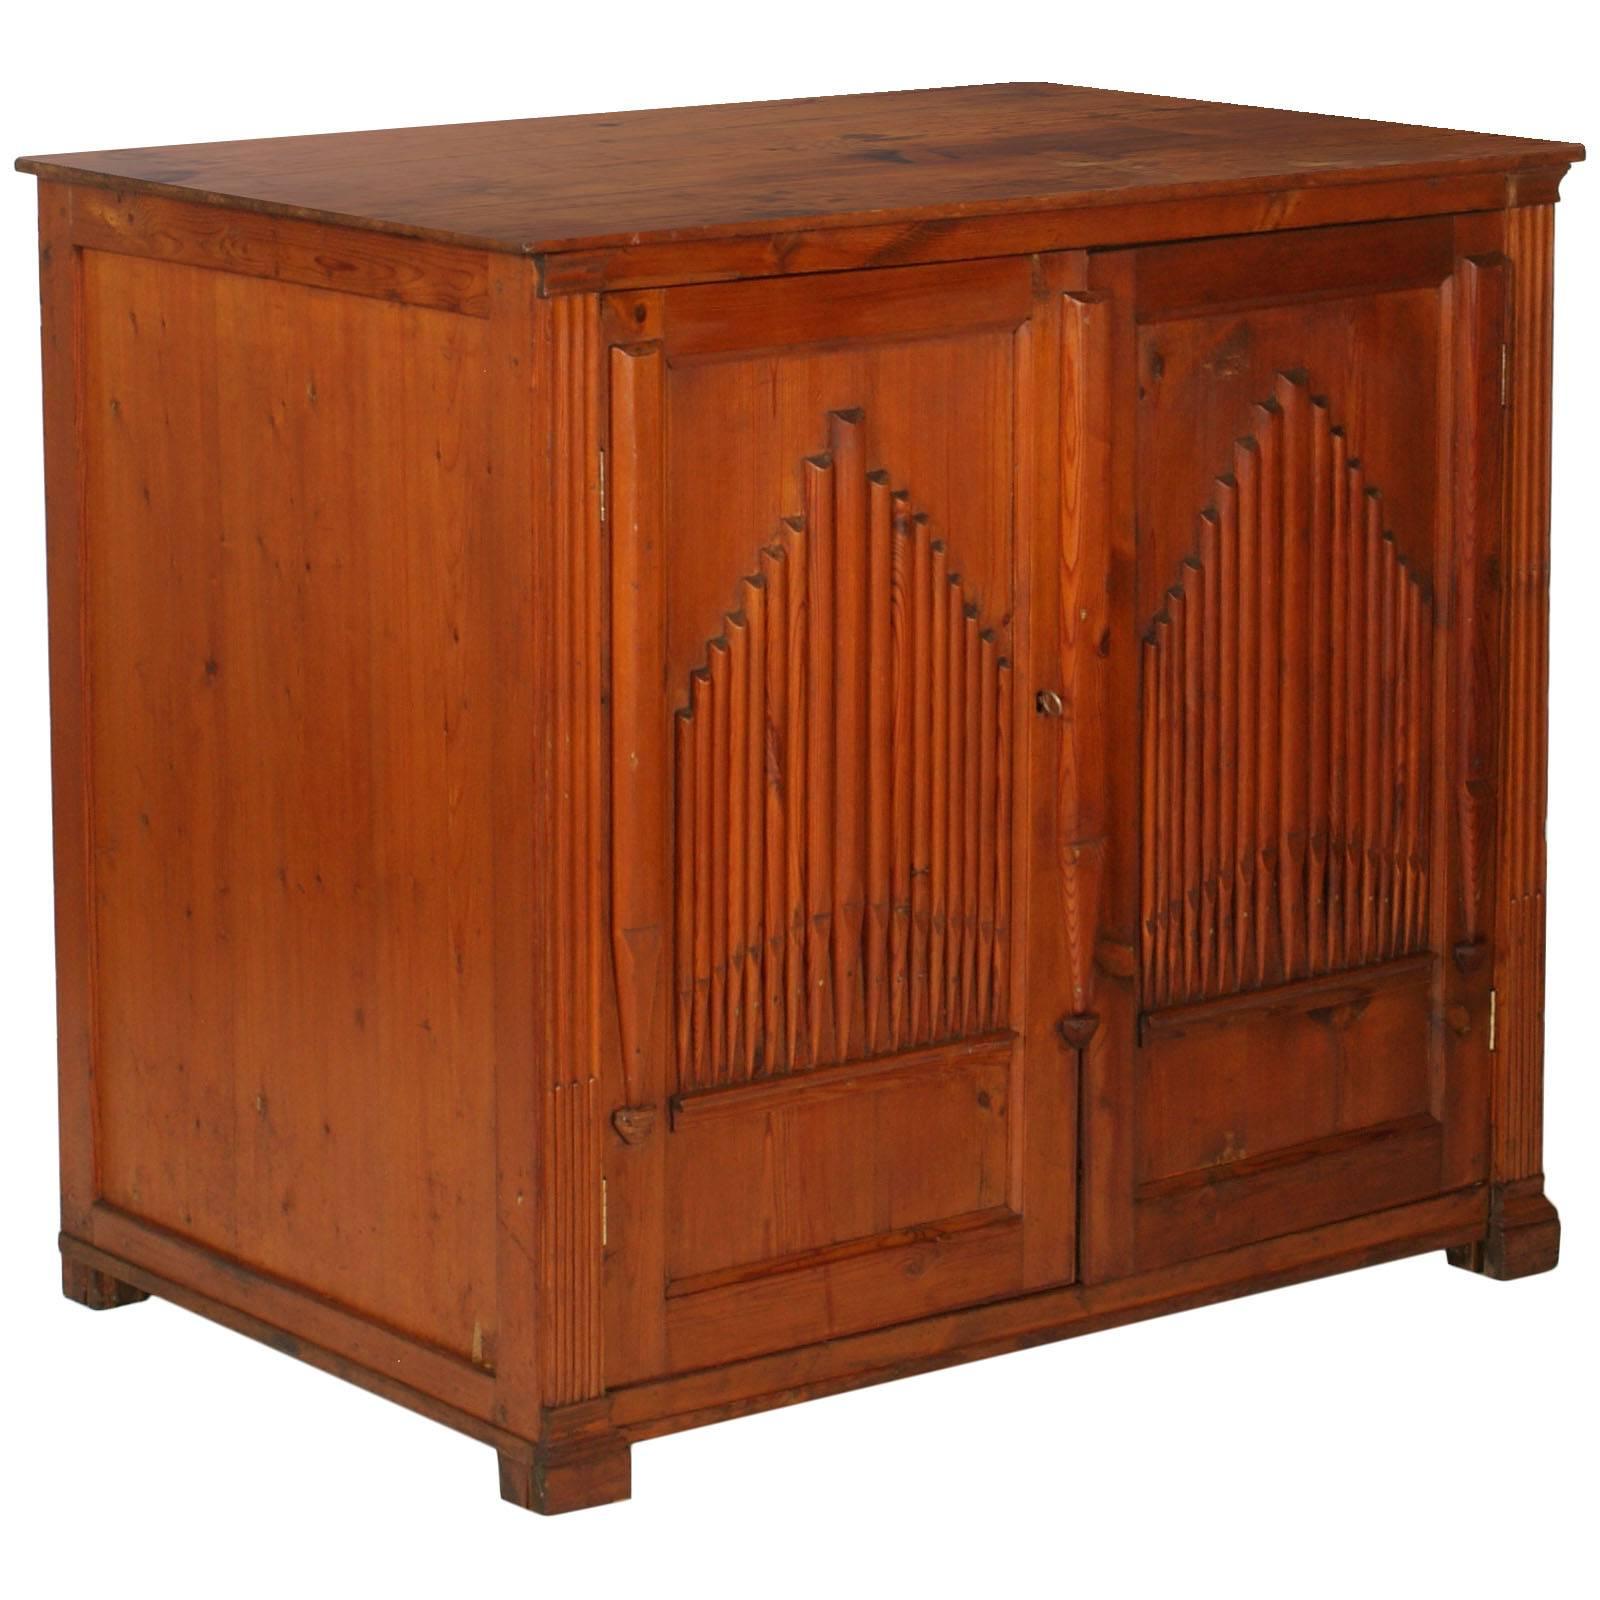 Sculptural sideboard in solid larch from the early 19th century. With two doors with musical organ decoration, squared and side slabs, with an internal shelf.
It comes from a church of Tuscany
Measure cm: H 100, W 112, D 73 

A beautiful piece